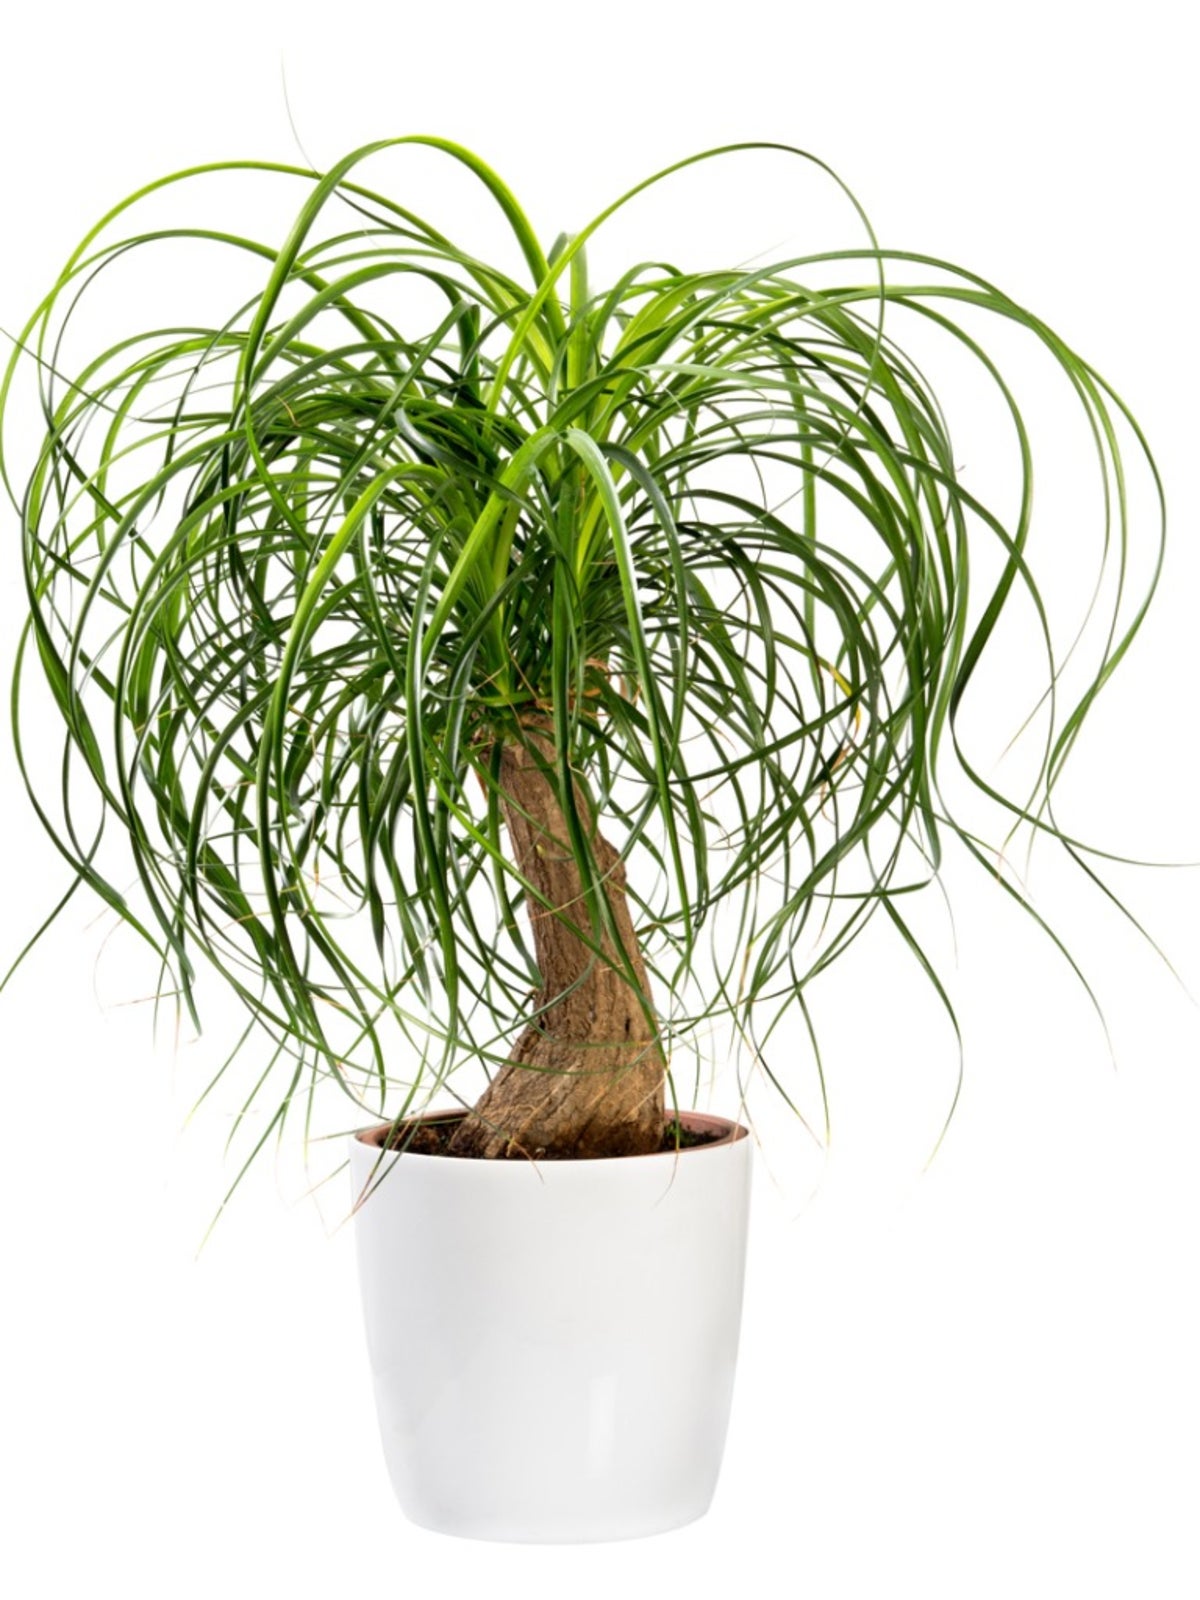 Ponytail Palm Top Broke Off – How Can You Fix It